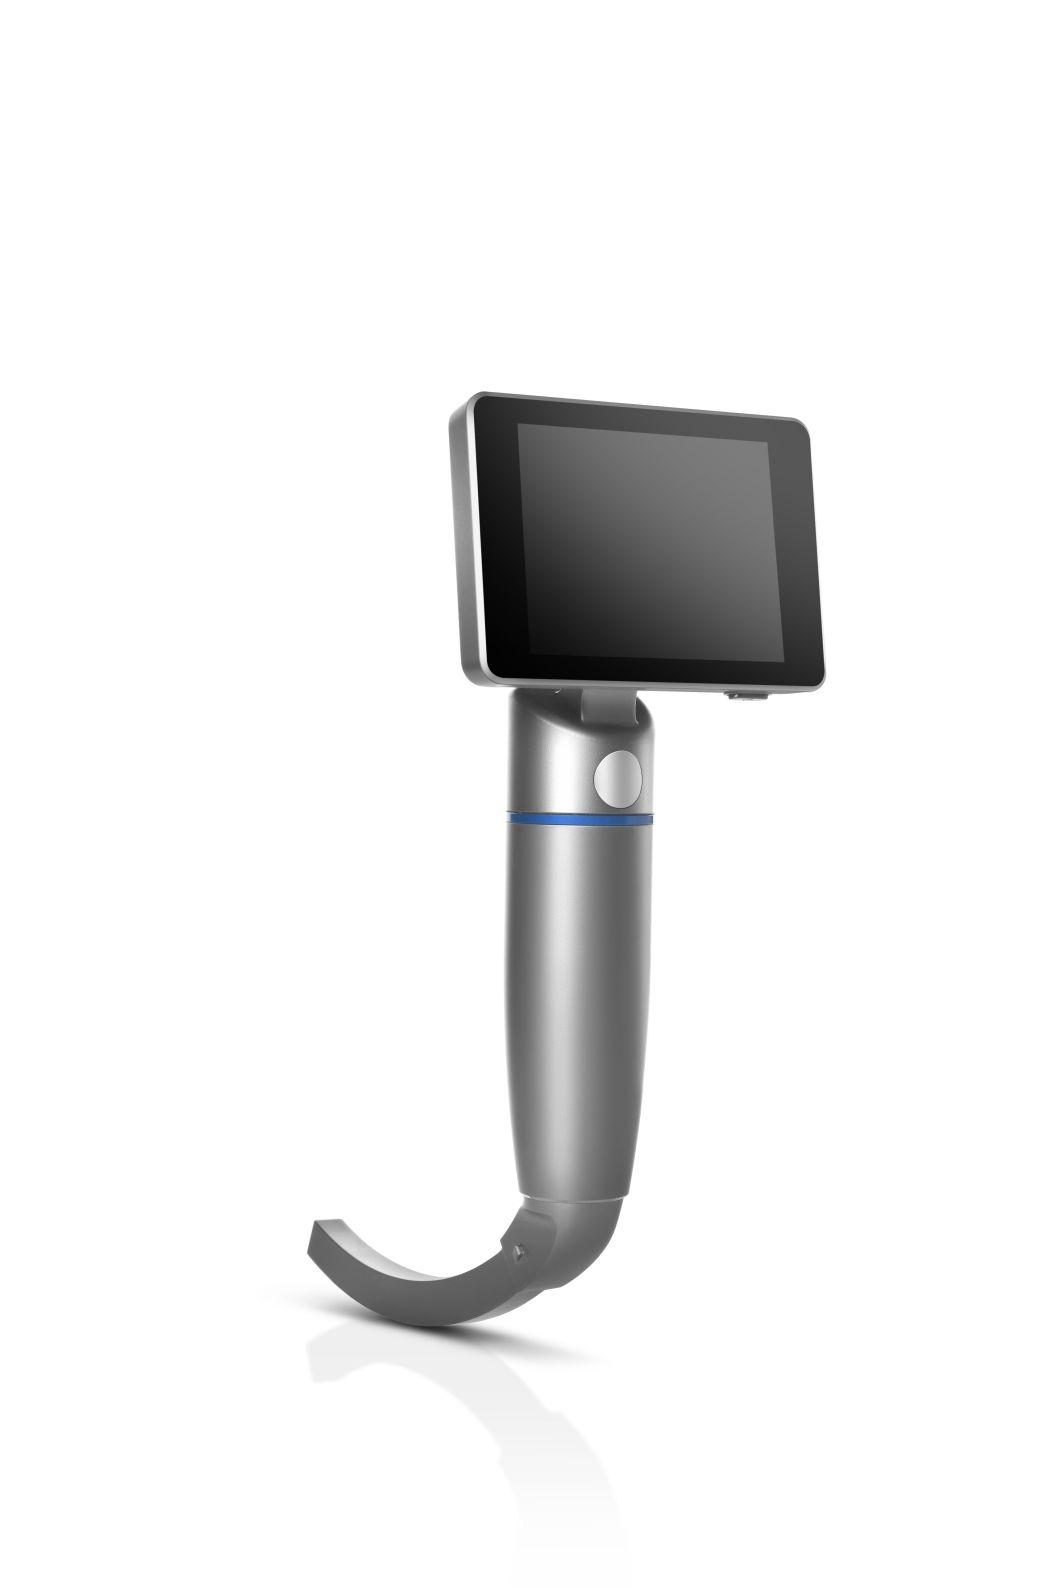 Anesthesia Video Laryngoscope Used for Routine Endotracheal Tube Intubations